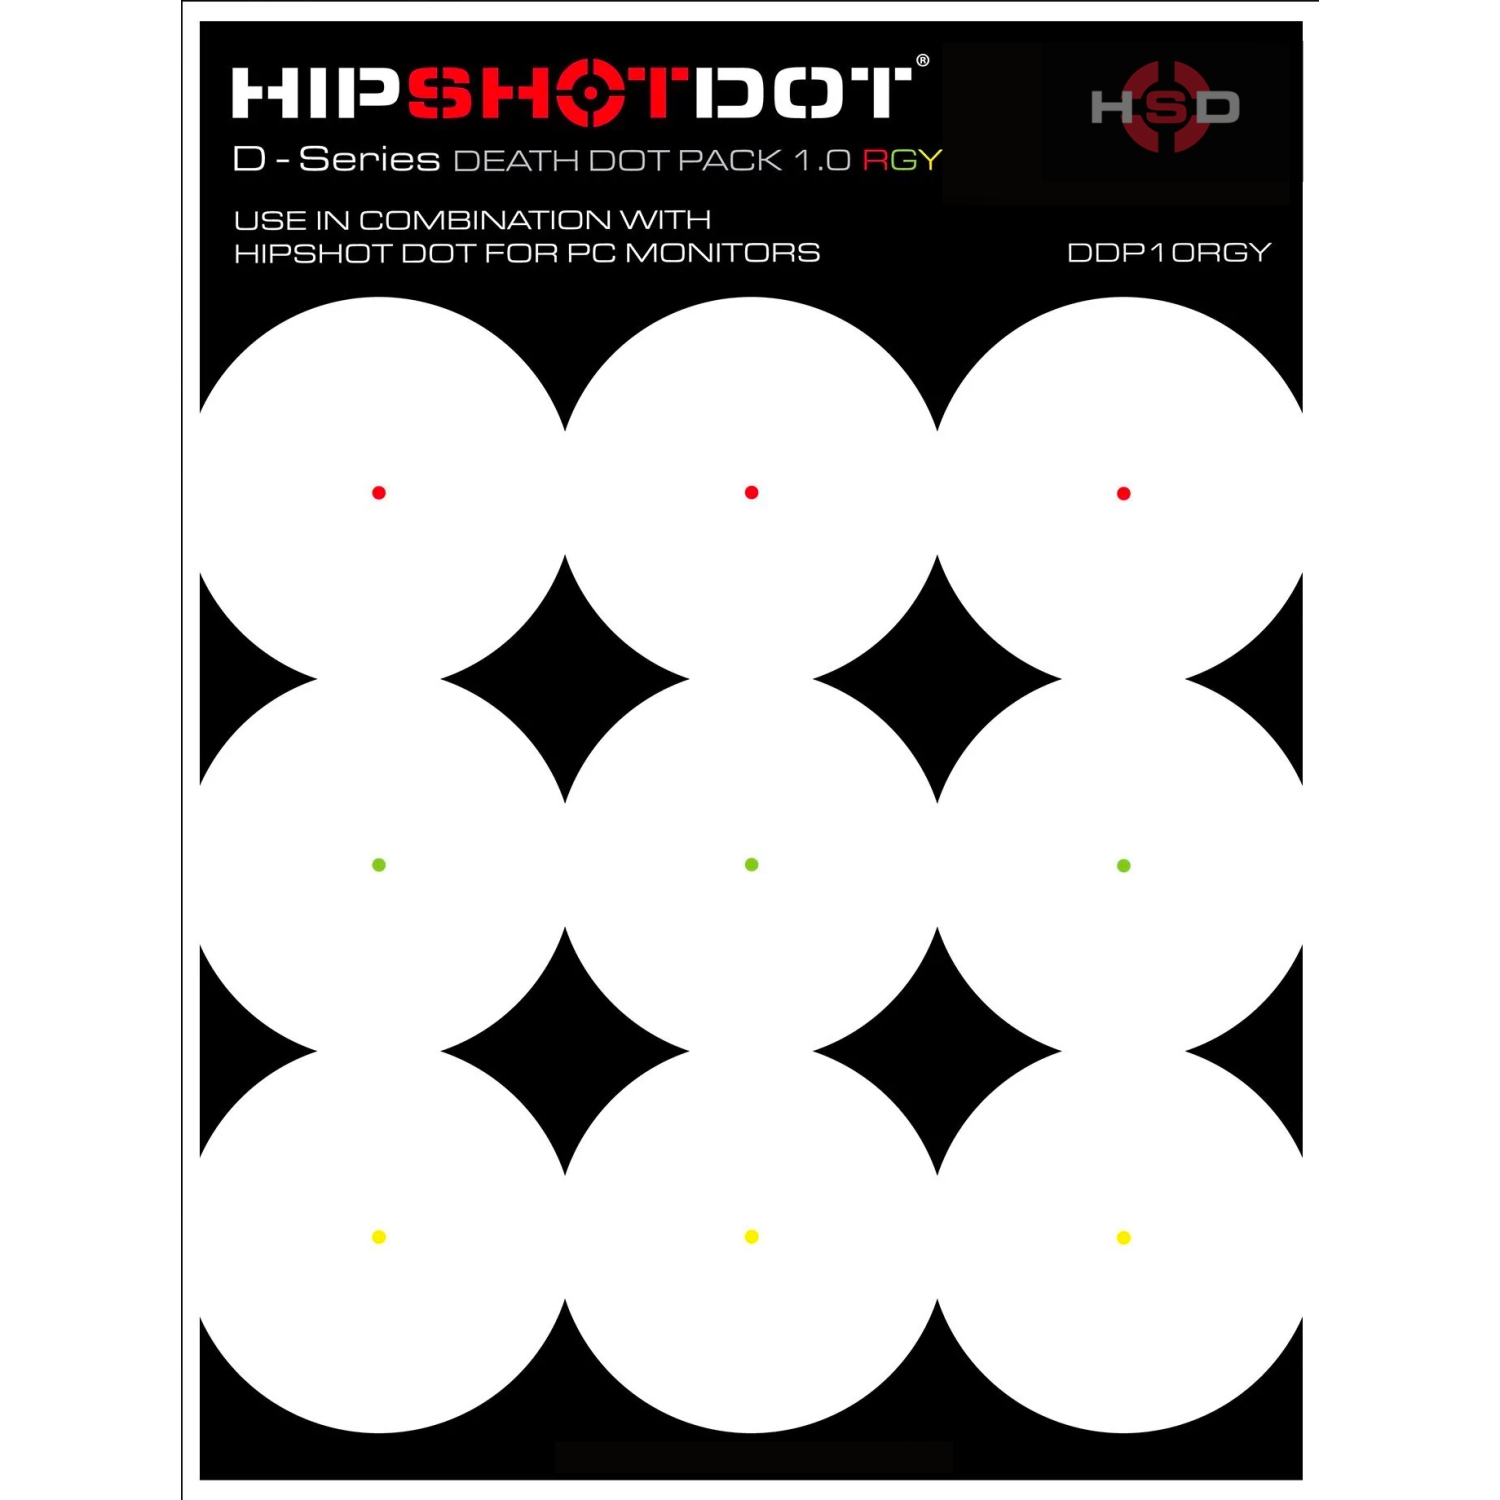 HipShotDot D-Series Tech Pack - Reusable Transparent Aim Sight Assist TV Decals - Gaming Television or Monitor Decal for FPS Video Games Compatible with PC, Xbox & Playstation (TP 1.0, Red)